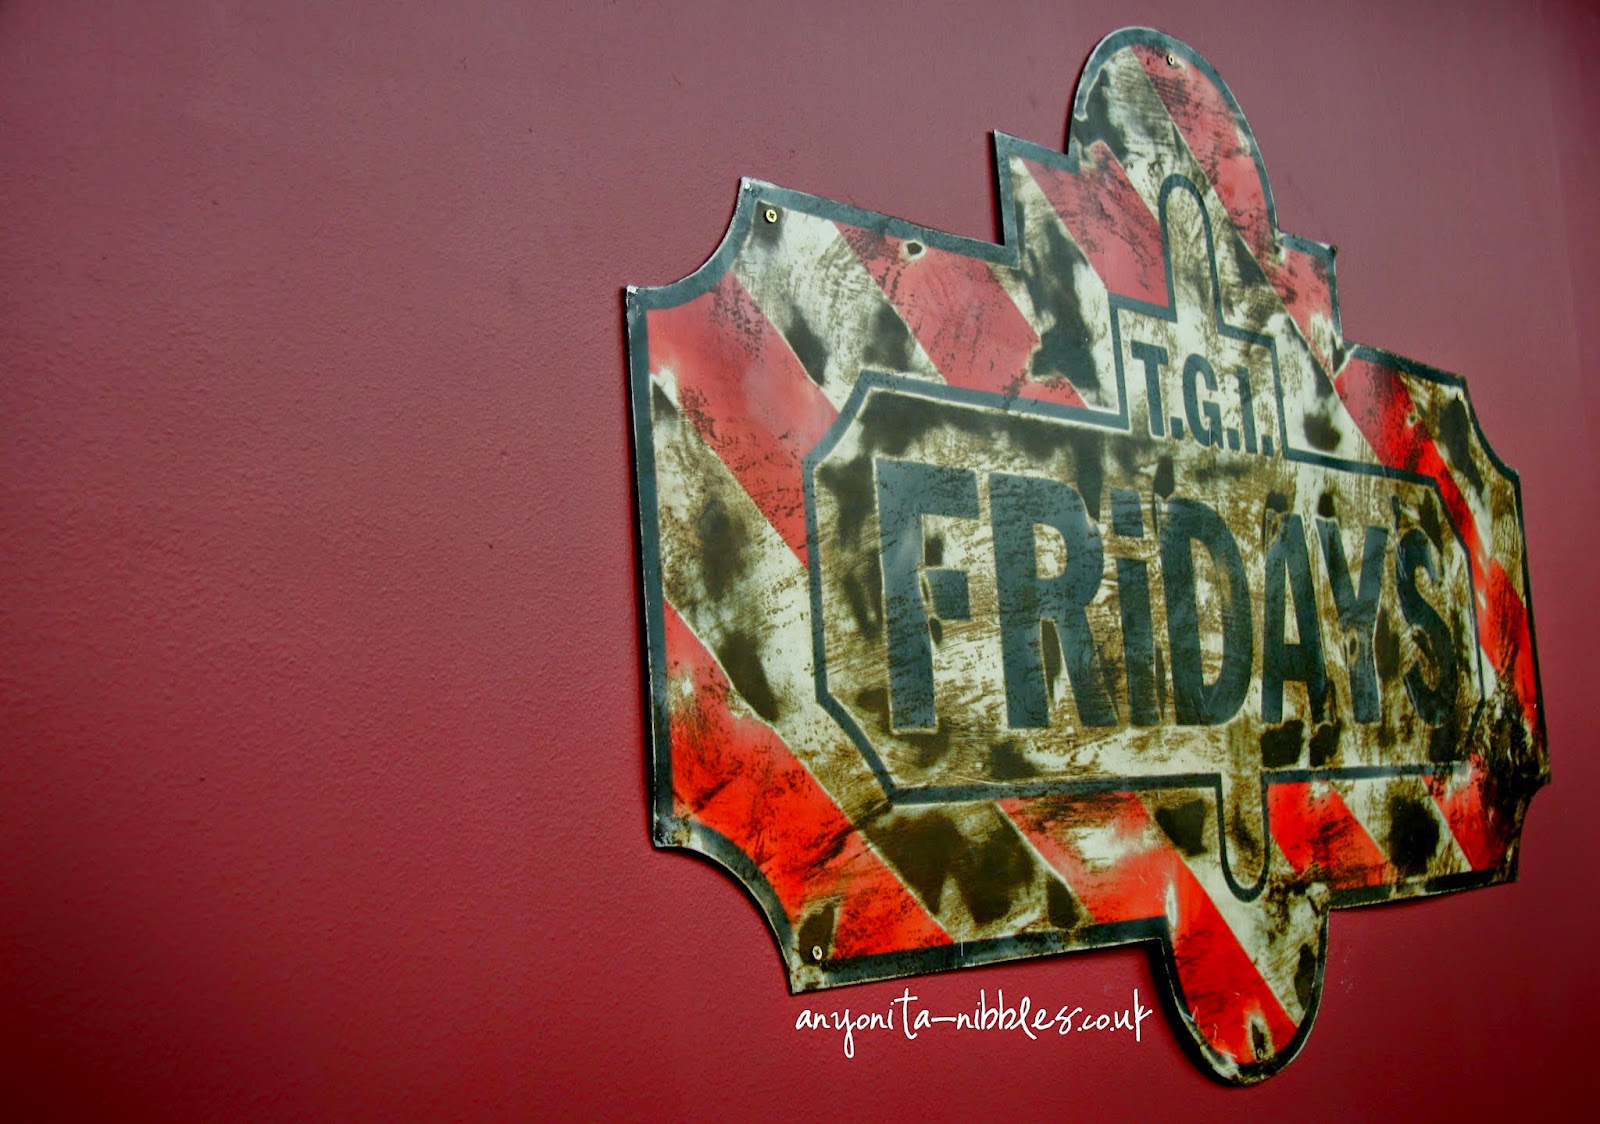 TGI Friday's: quirky decor, good food, excellent staff | Anyonita-nibbles.co.uk